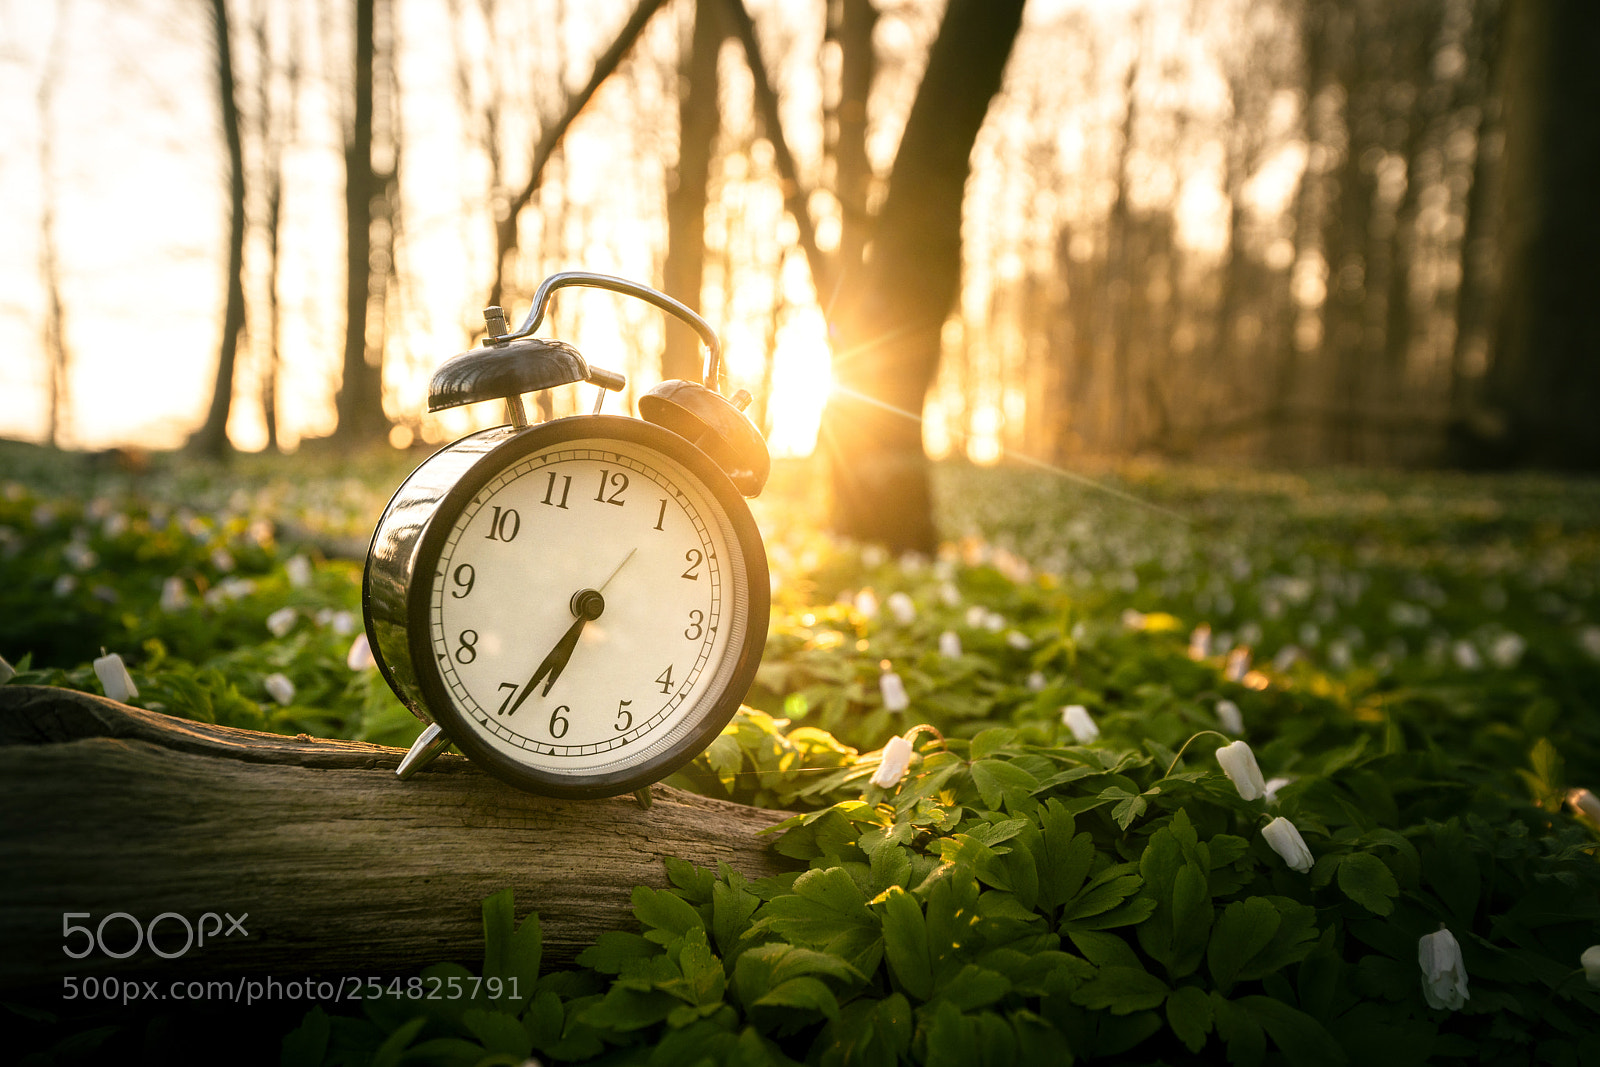 Sony a99 II sample photo. Alarm clock in a photography